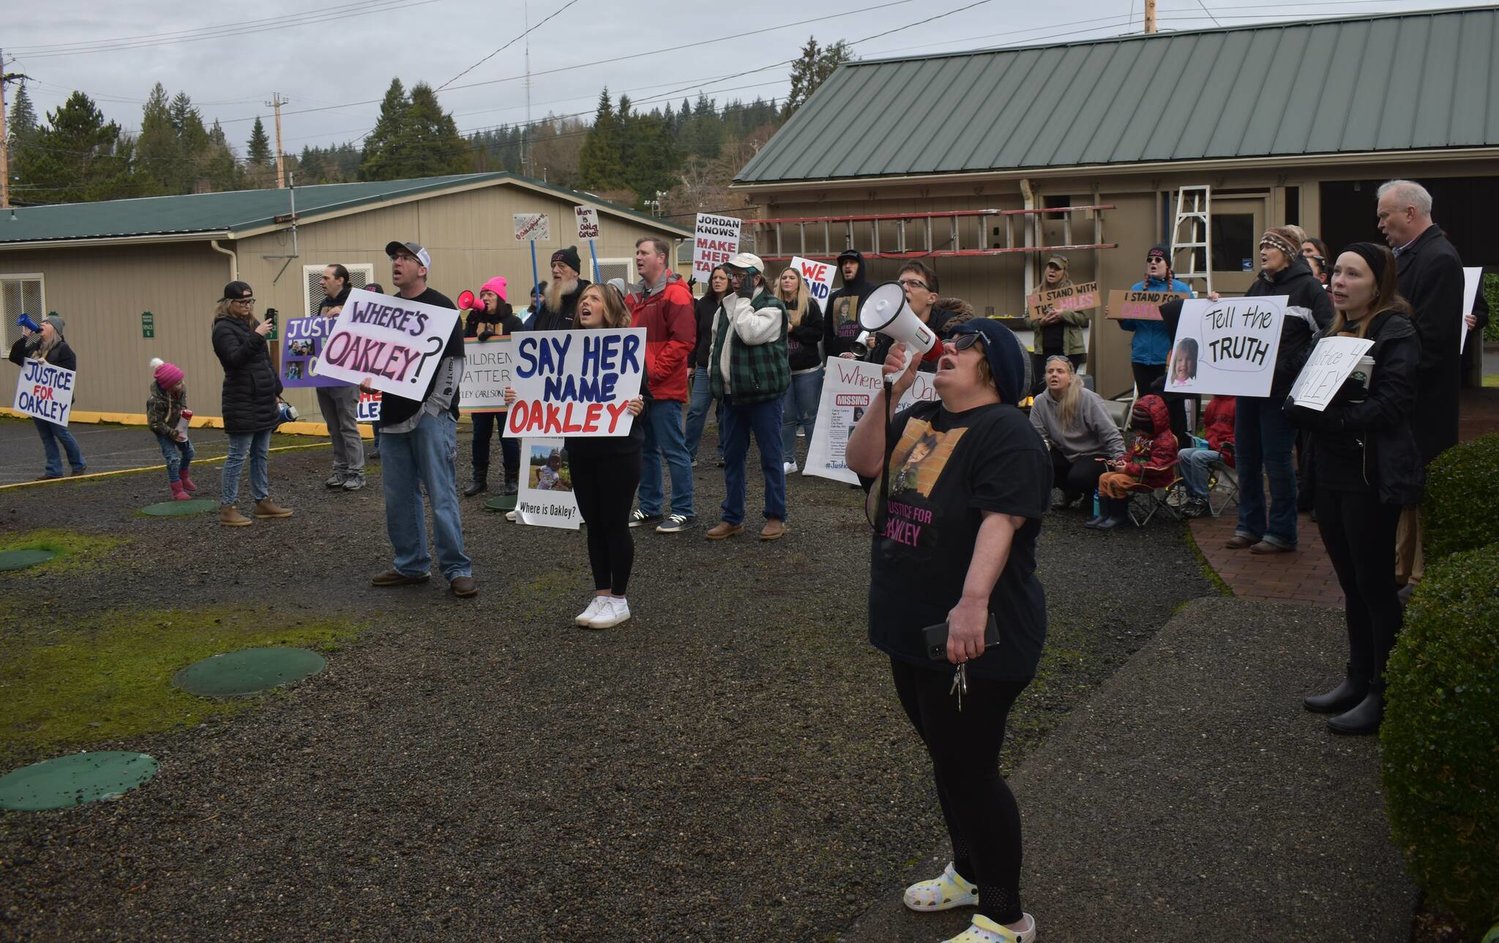 For the ninth time since December 2021, community members gathered outside the Grays Harbor County Jail to advocate for the whereabouts of missing 6-year-old Oakley Carlson. The chants were directed toward Oakley’s biological mother Jordan Bowers, a prime suspect in the disappearance of her daughter. Bowers is on trial for identity theft.